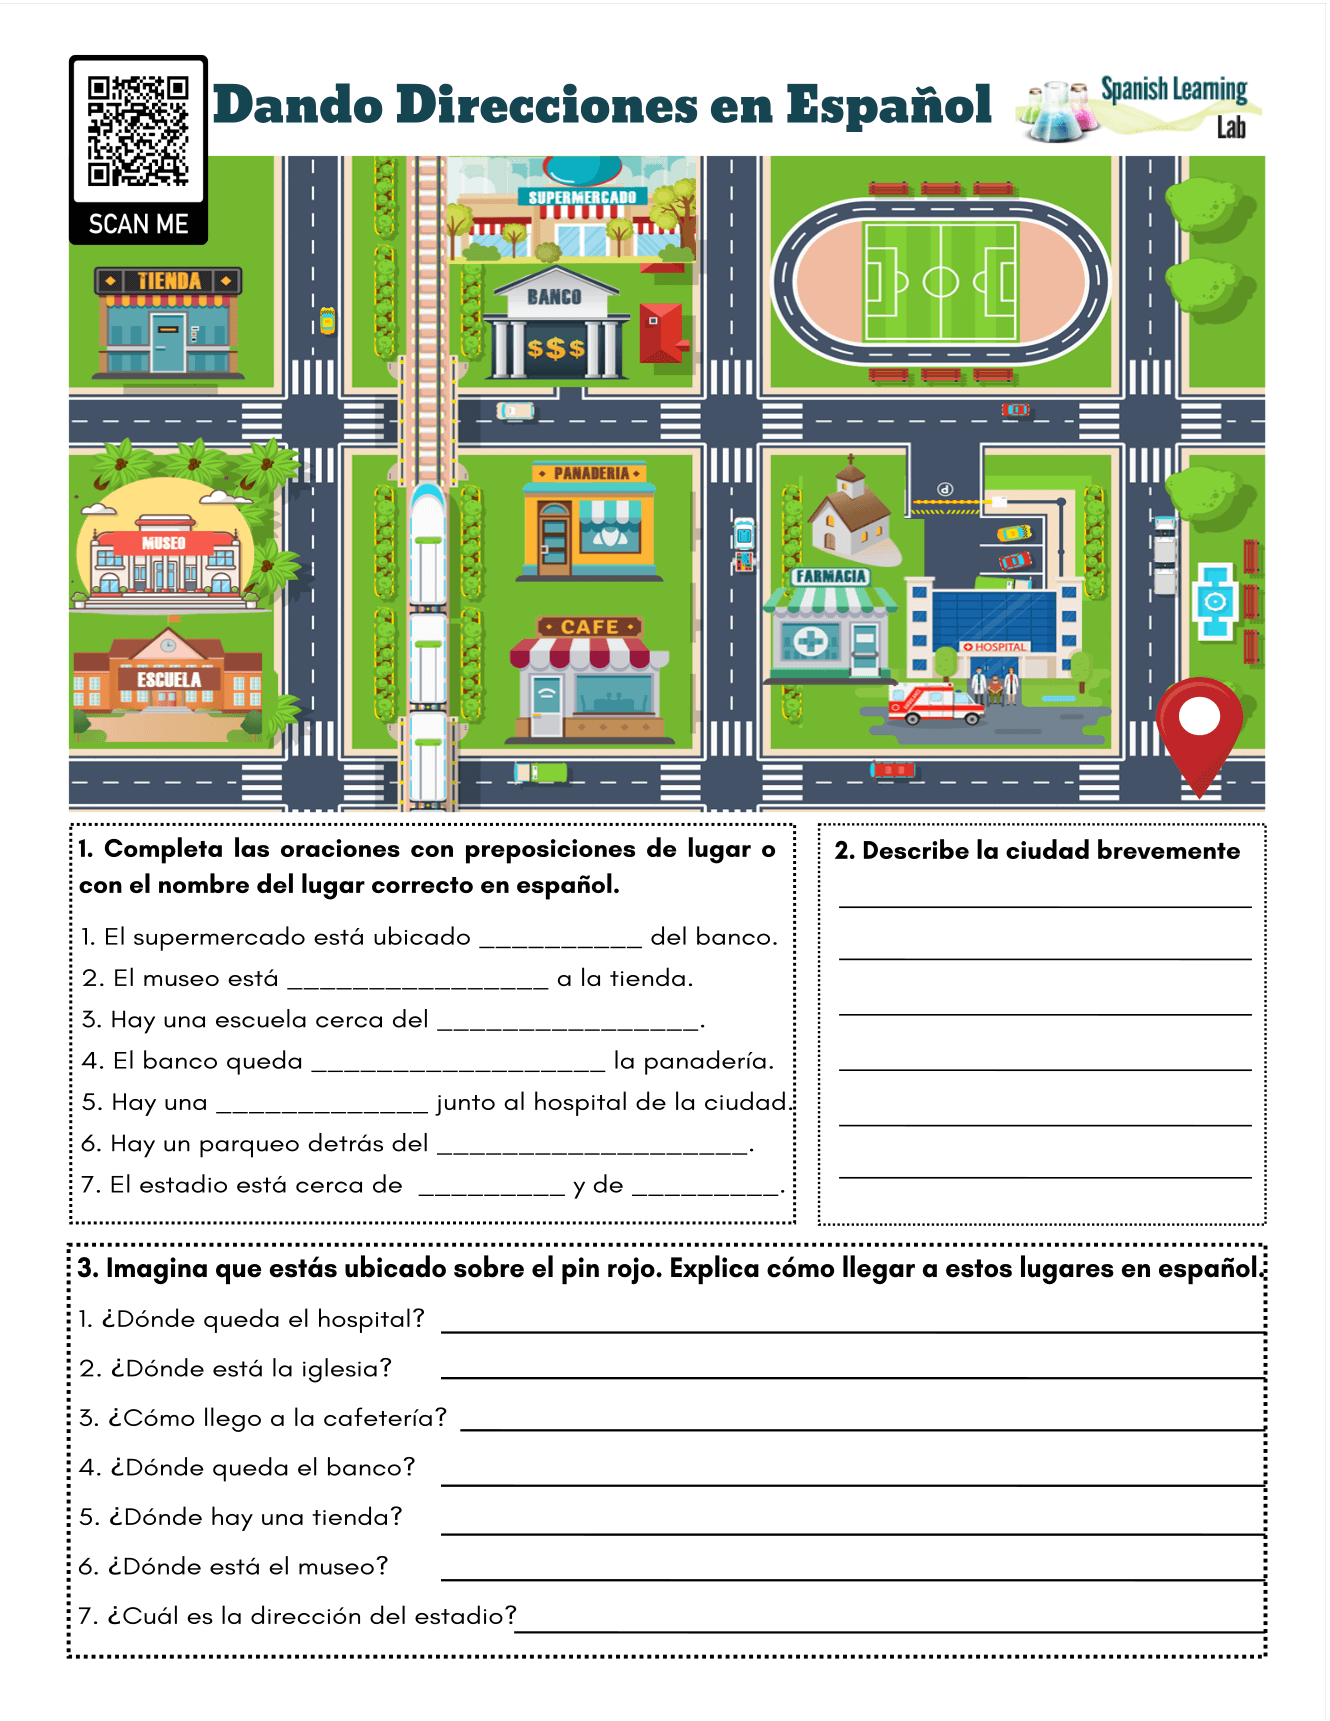 giving-directions-in-spanish-pdf-worksheet-spanish-learning-lab